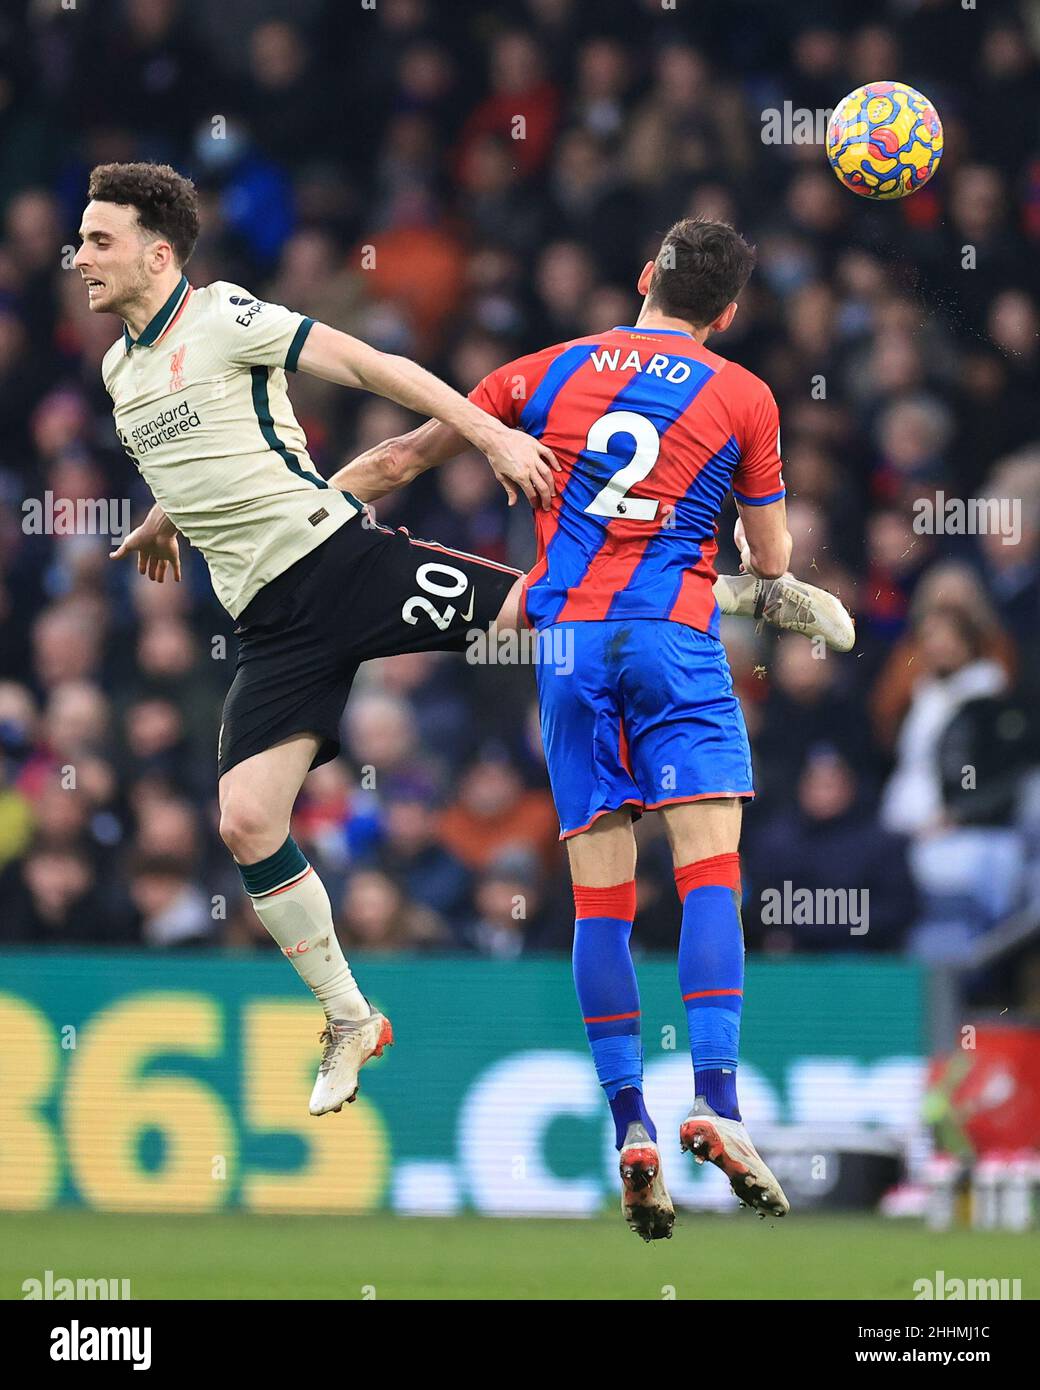 Diogo Jota #20 of Liverpool and Joel Ward #2 of Crystal Palace battle for the ball Stock Photo